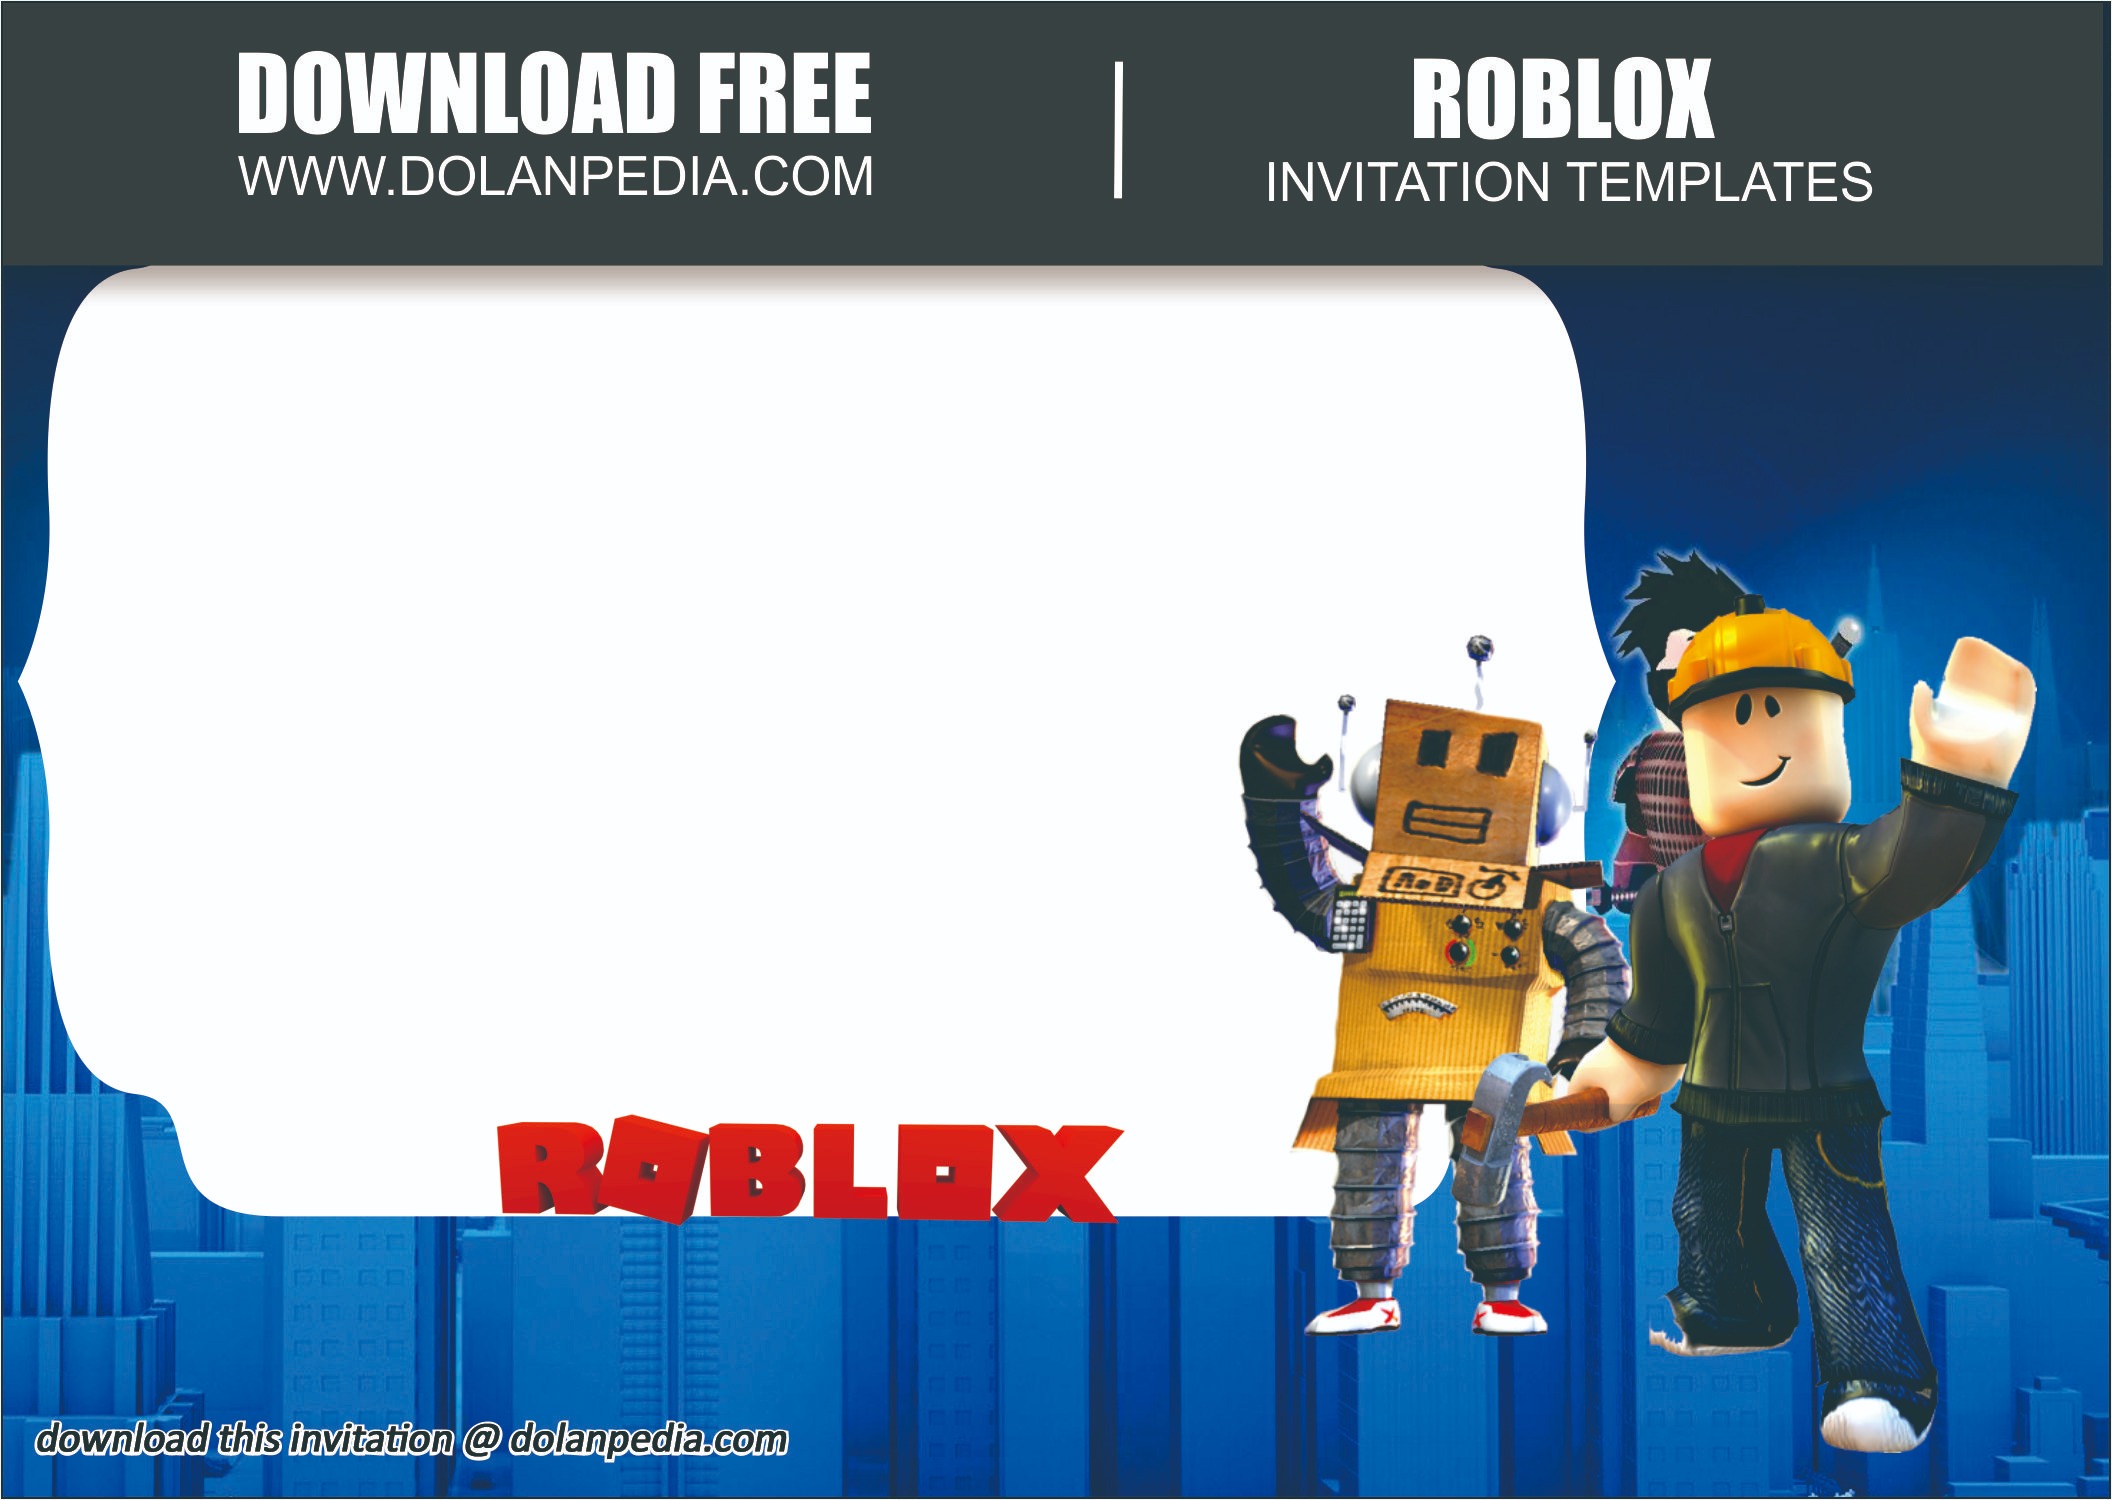 Free Printable Roblox Invitation Template Dolanpedia Invitations Template - roblox invitation template free roblox how to get free